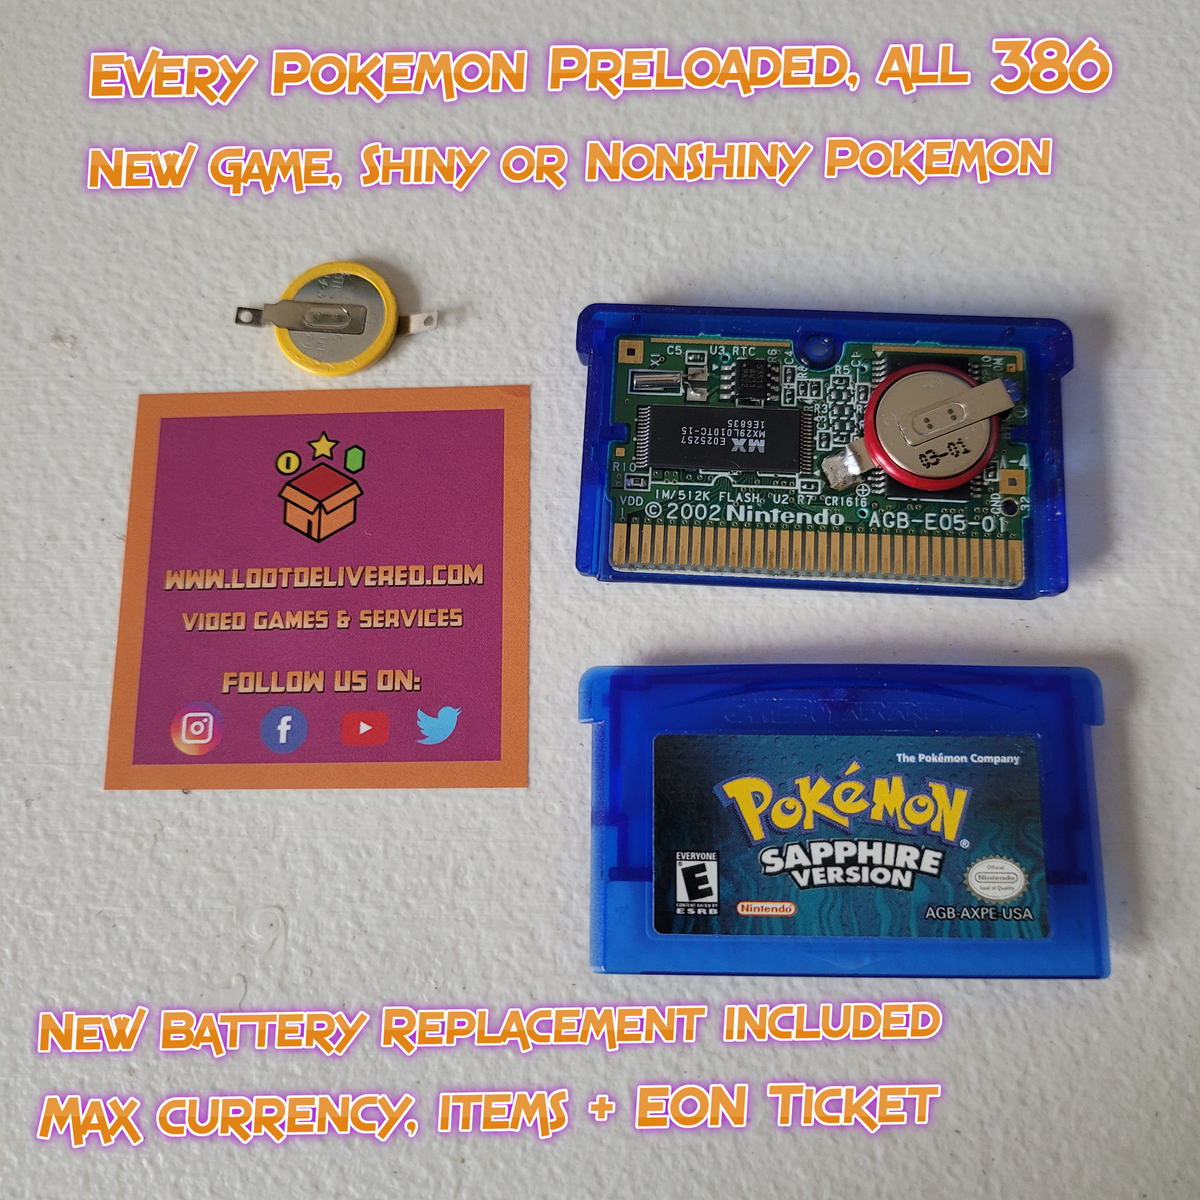 Pokemon Fire Red Authentic GBA Gameboy Advance - Preloaded All 386